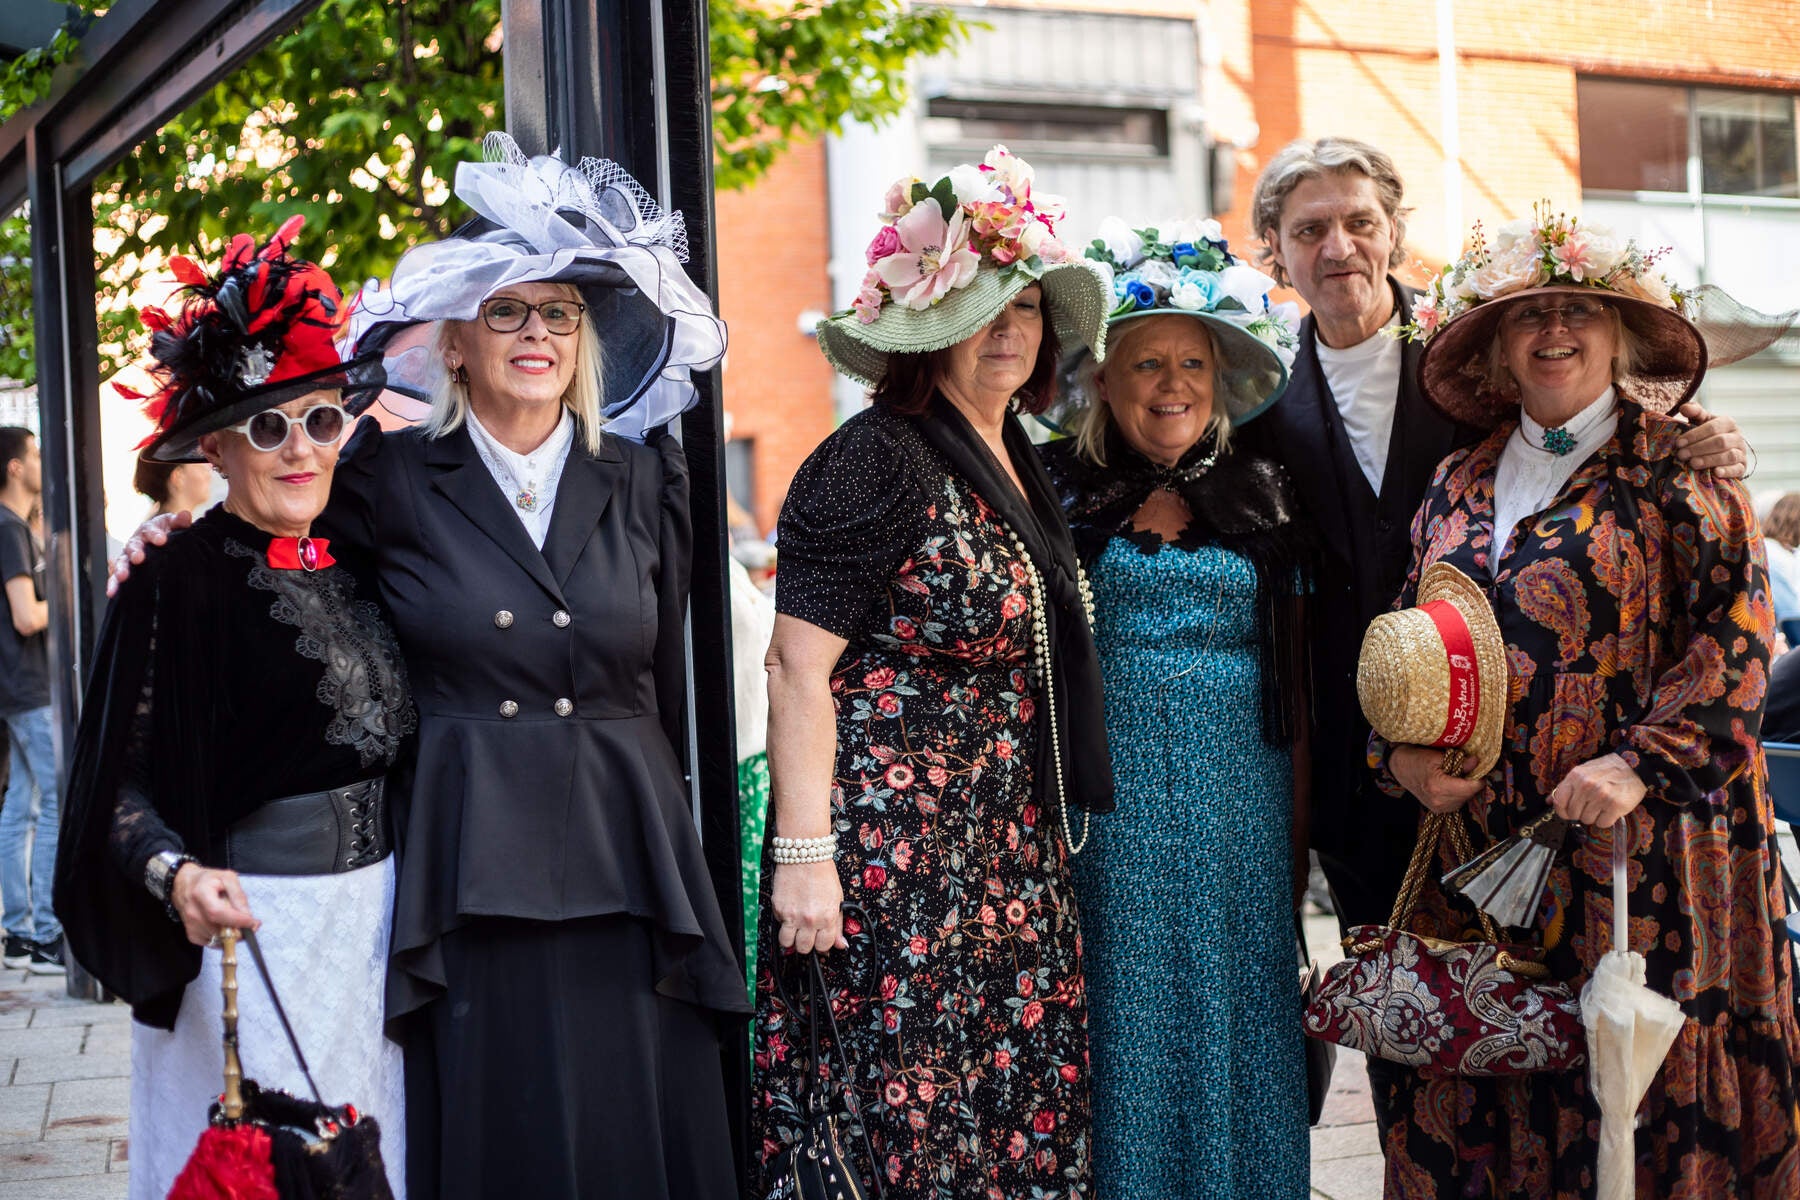 A group of Joyceans celebrating Bloomsday in Edwardian outfits